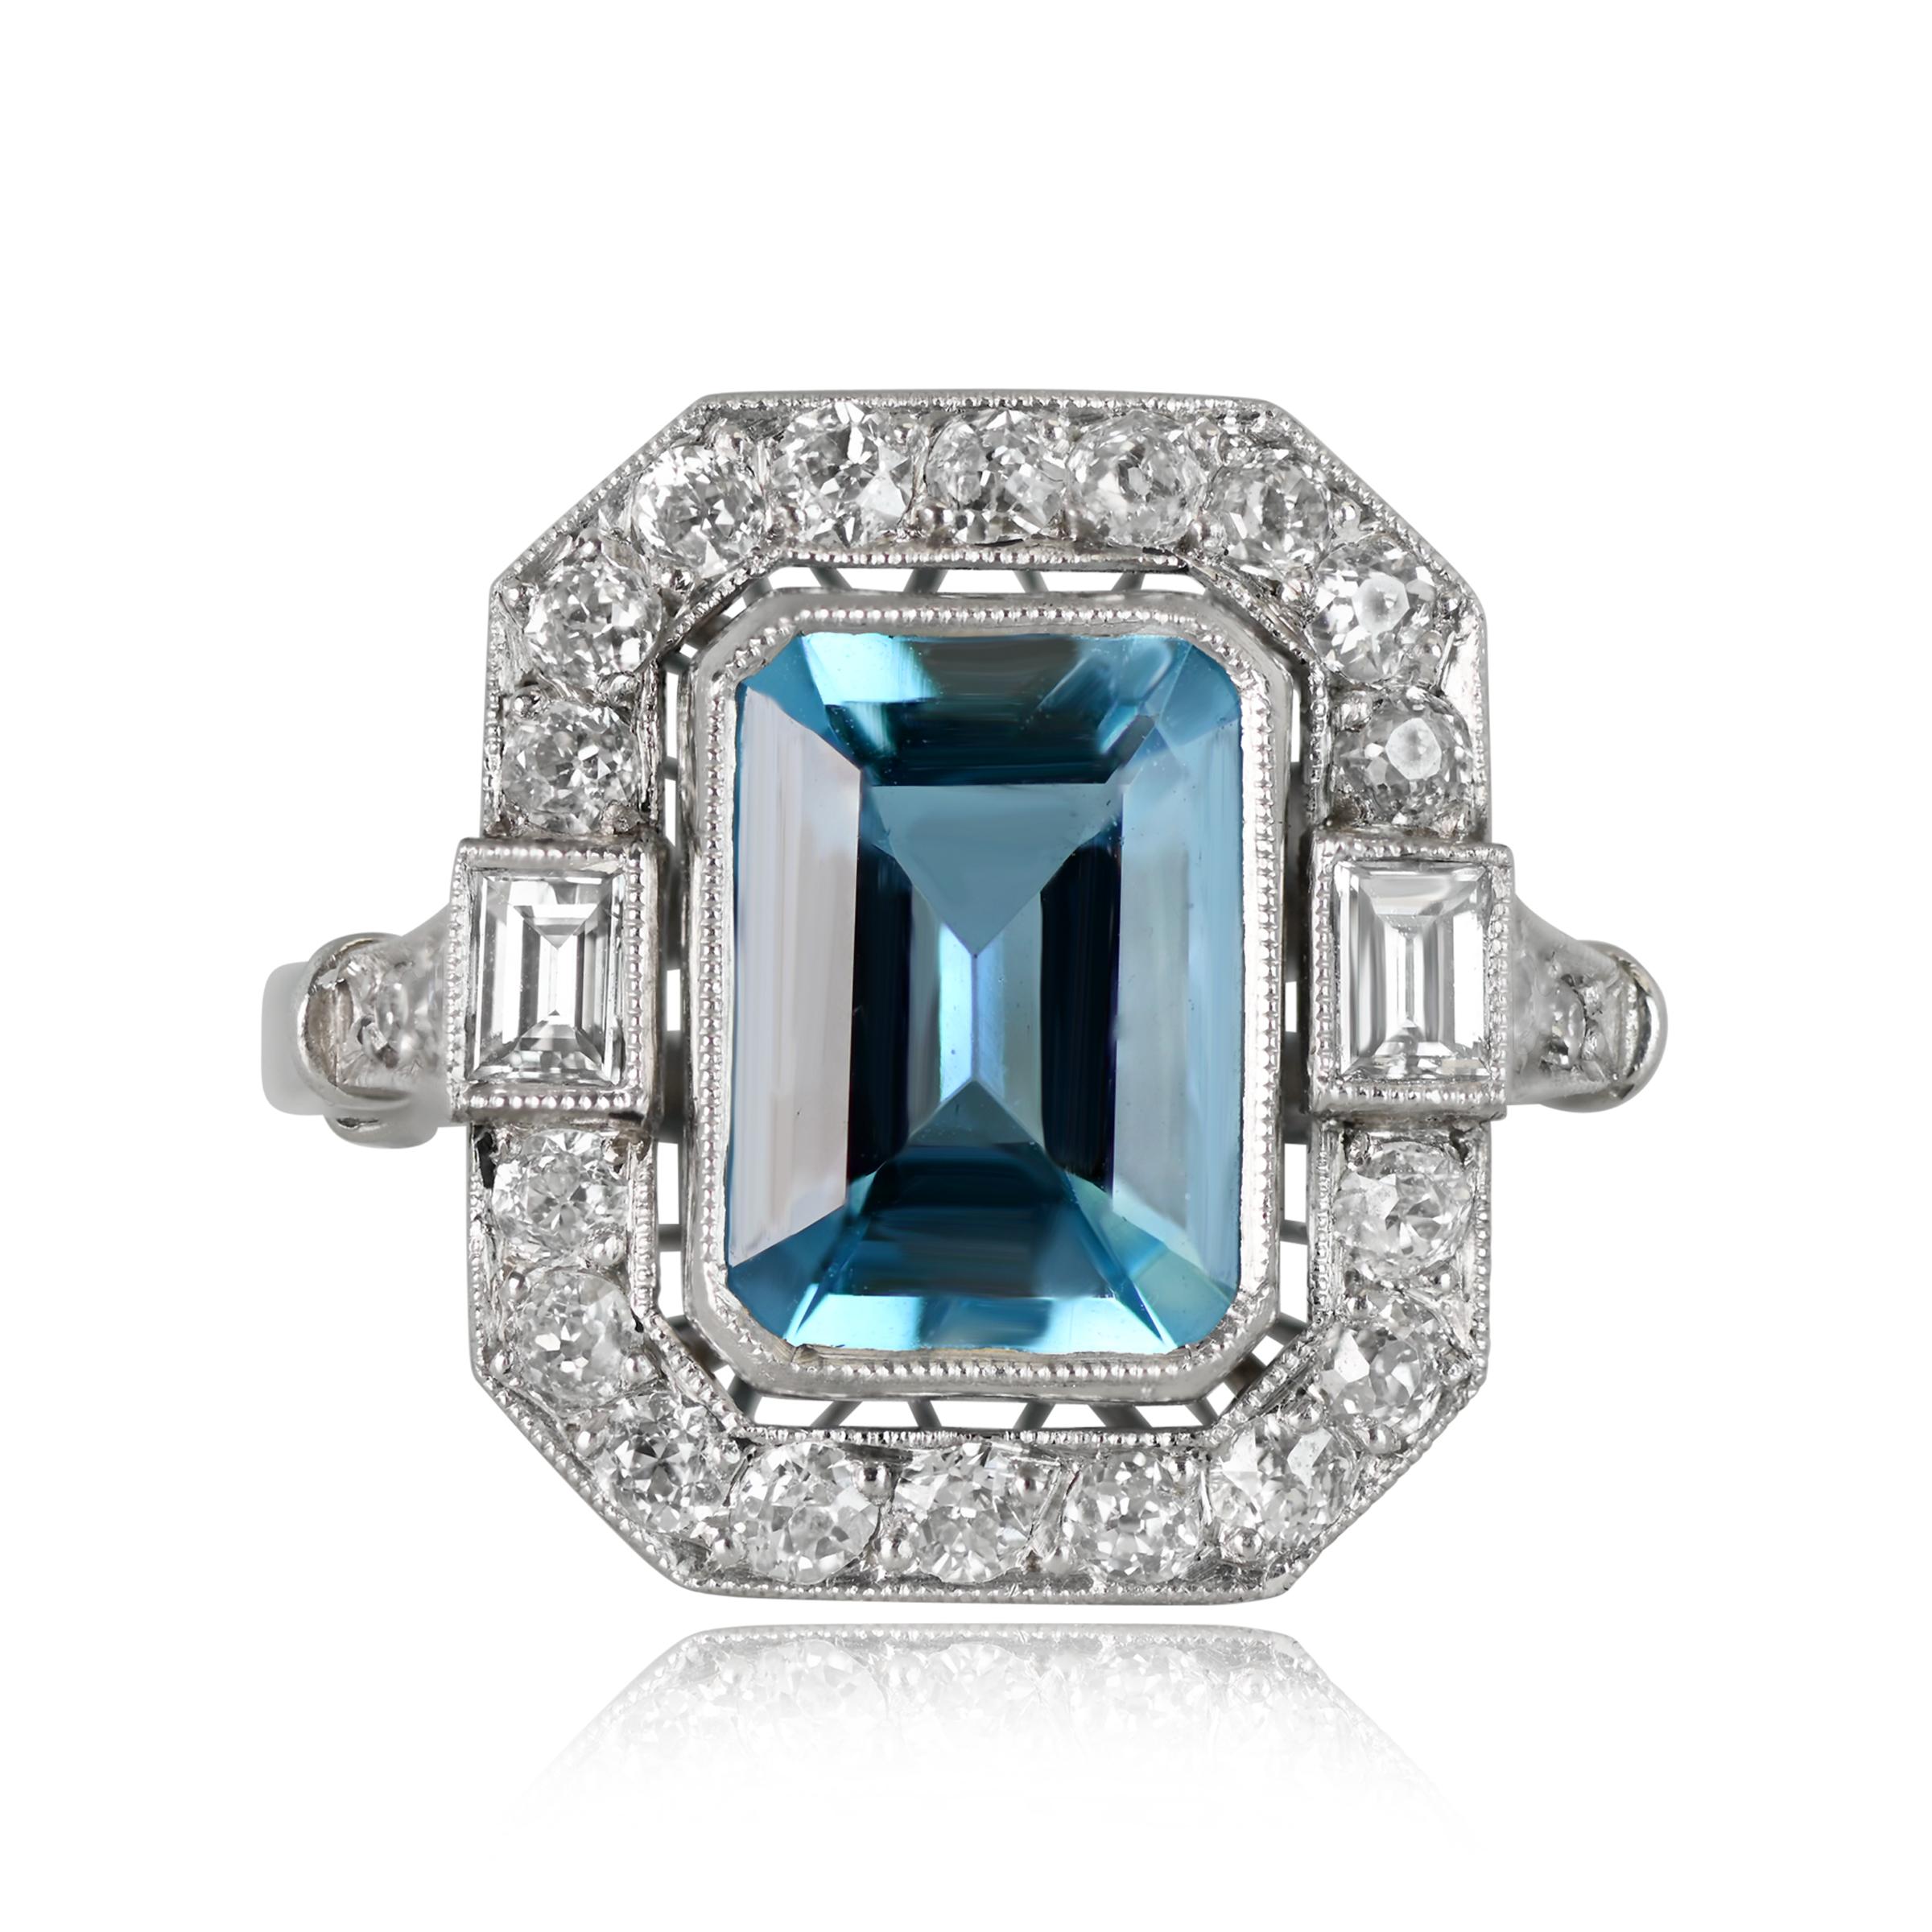 A stunning aquamarine and diamond engagement ring, featuring around 1 carat of diamonds. The center emerald-cut aquamarine is bezel-set, encircled by a diamond halo. Complementing the center stone, two baguette-cut diamonds flank it, and six more